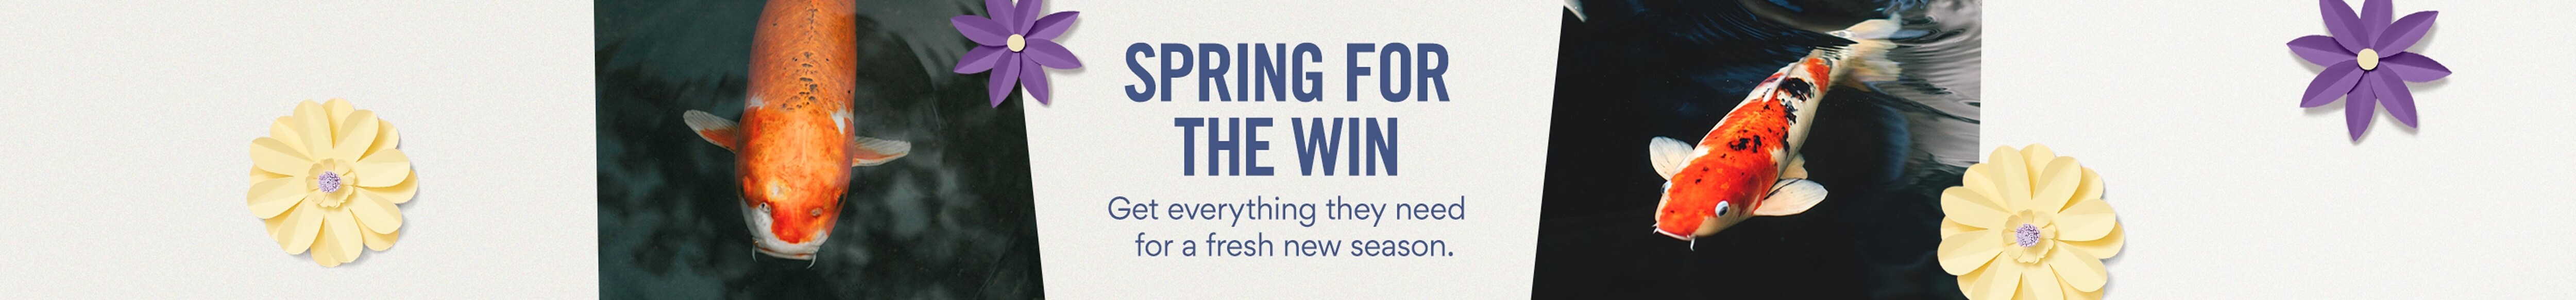 Spring for the Win: Get everything they need for a fresh new season